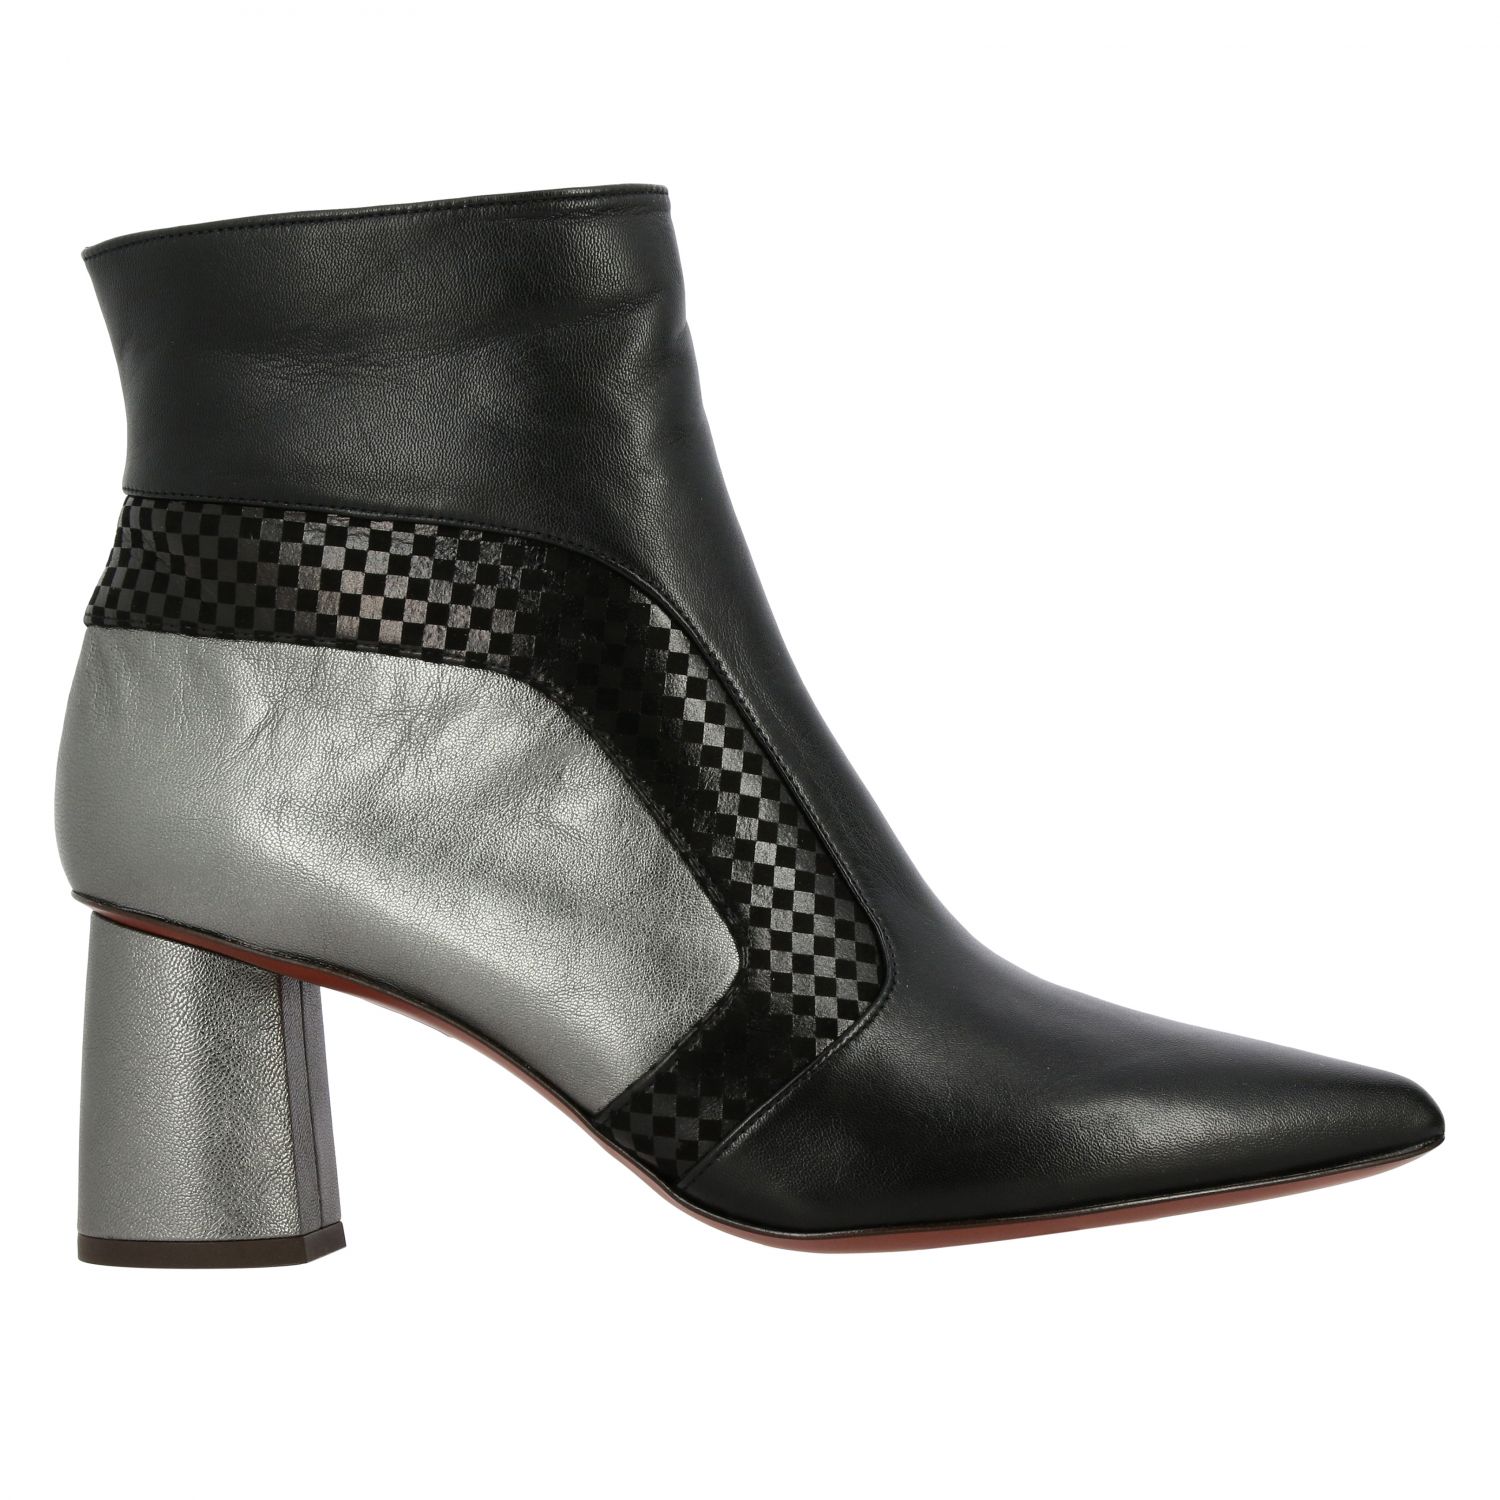 Chie Mihara Outlet: heeled ankle boots for women - Black | Chie Mihara ...